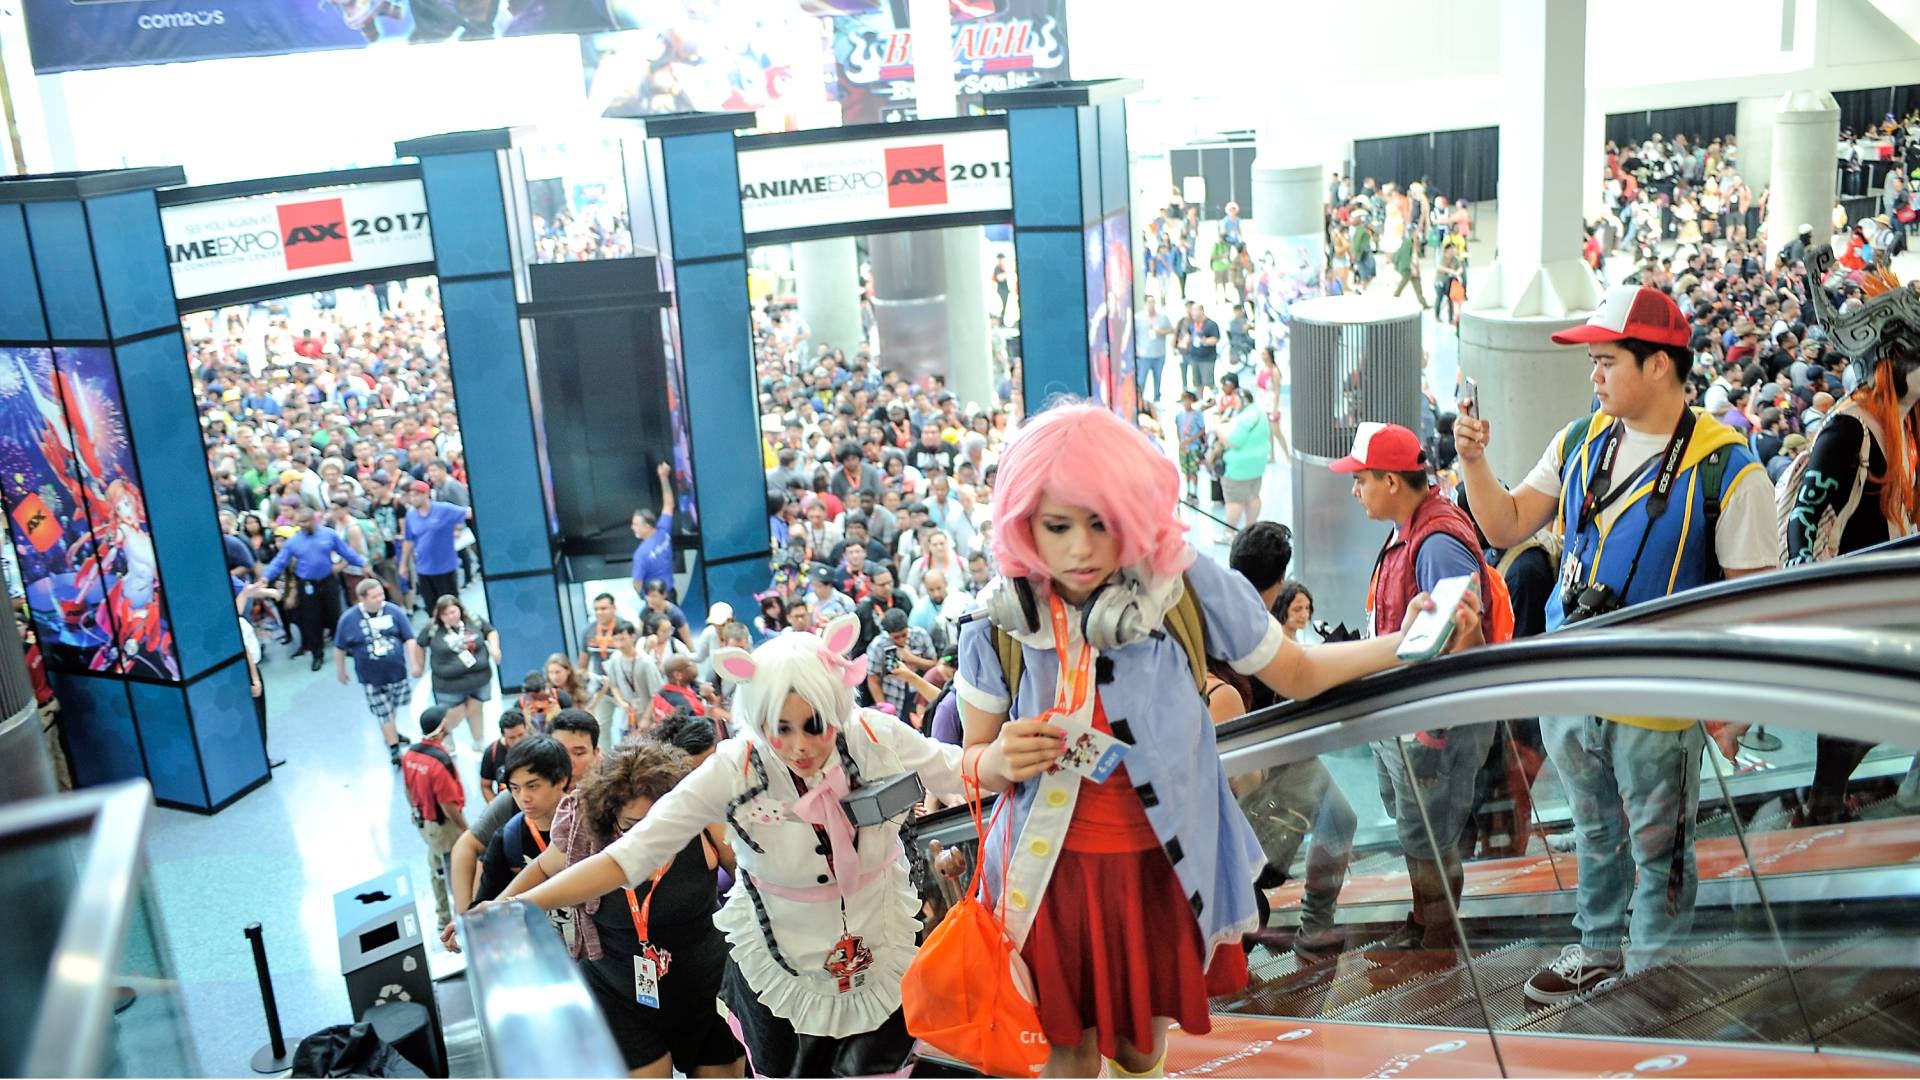 Cosplay after COVID: Safety a key focus for Crunchyroll Expo 2022